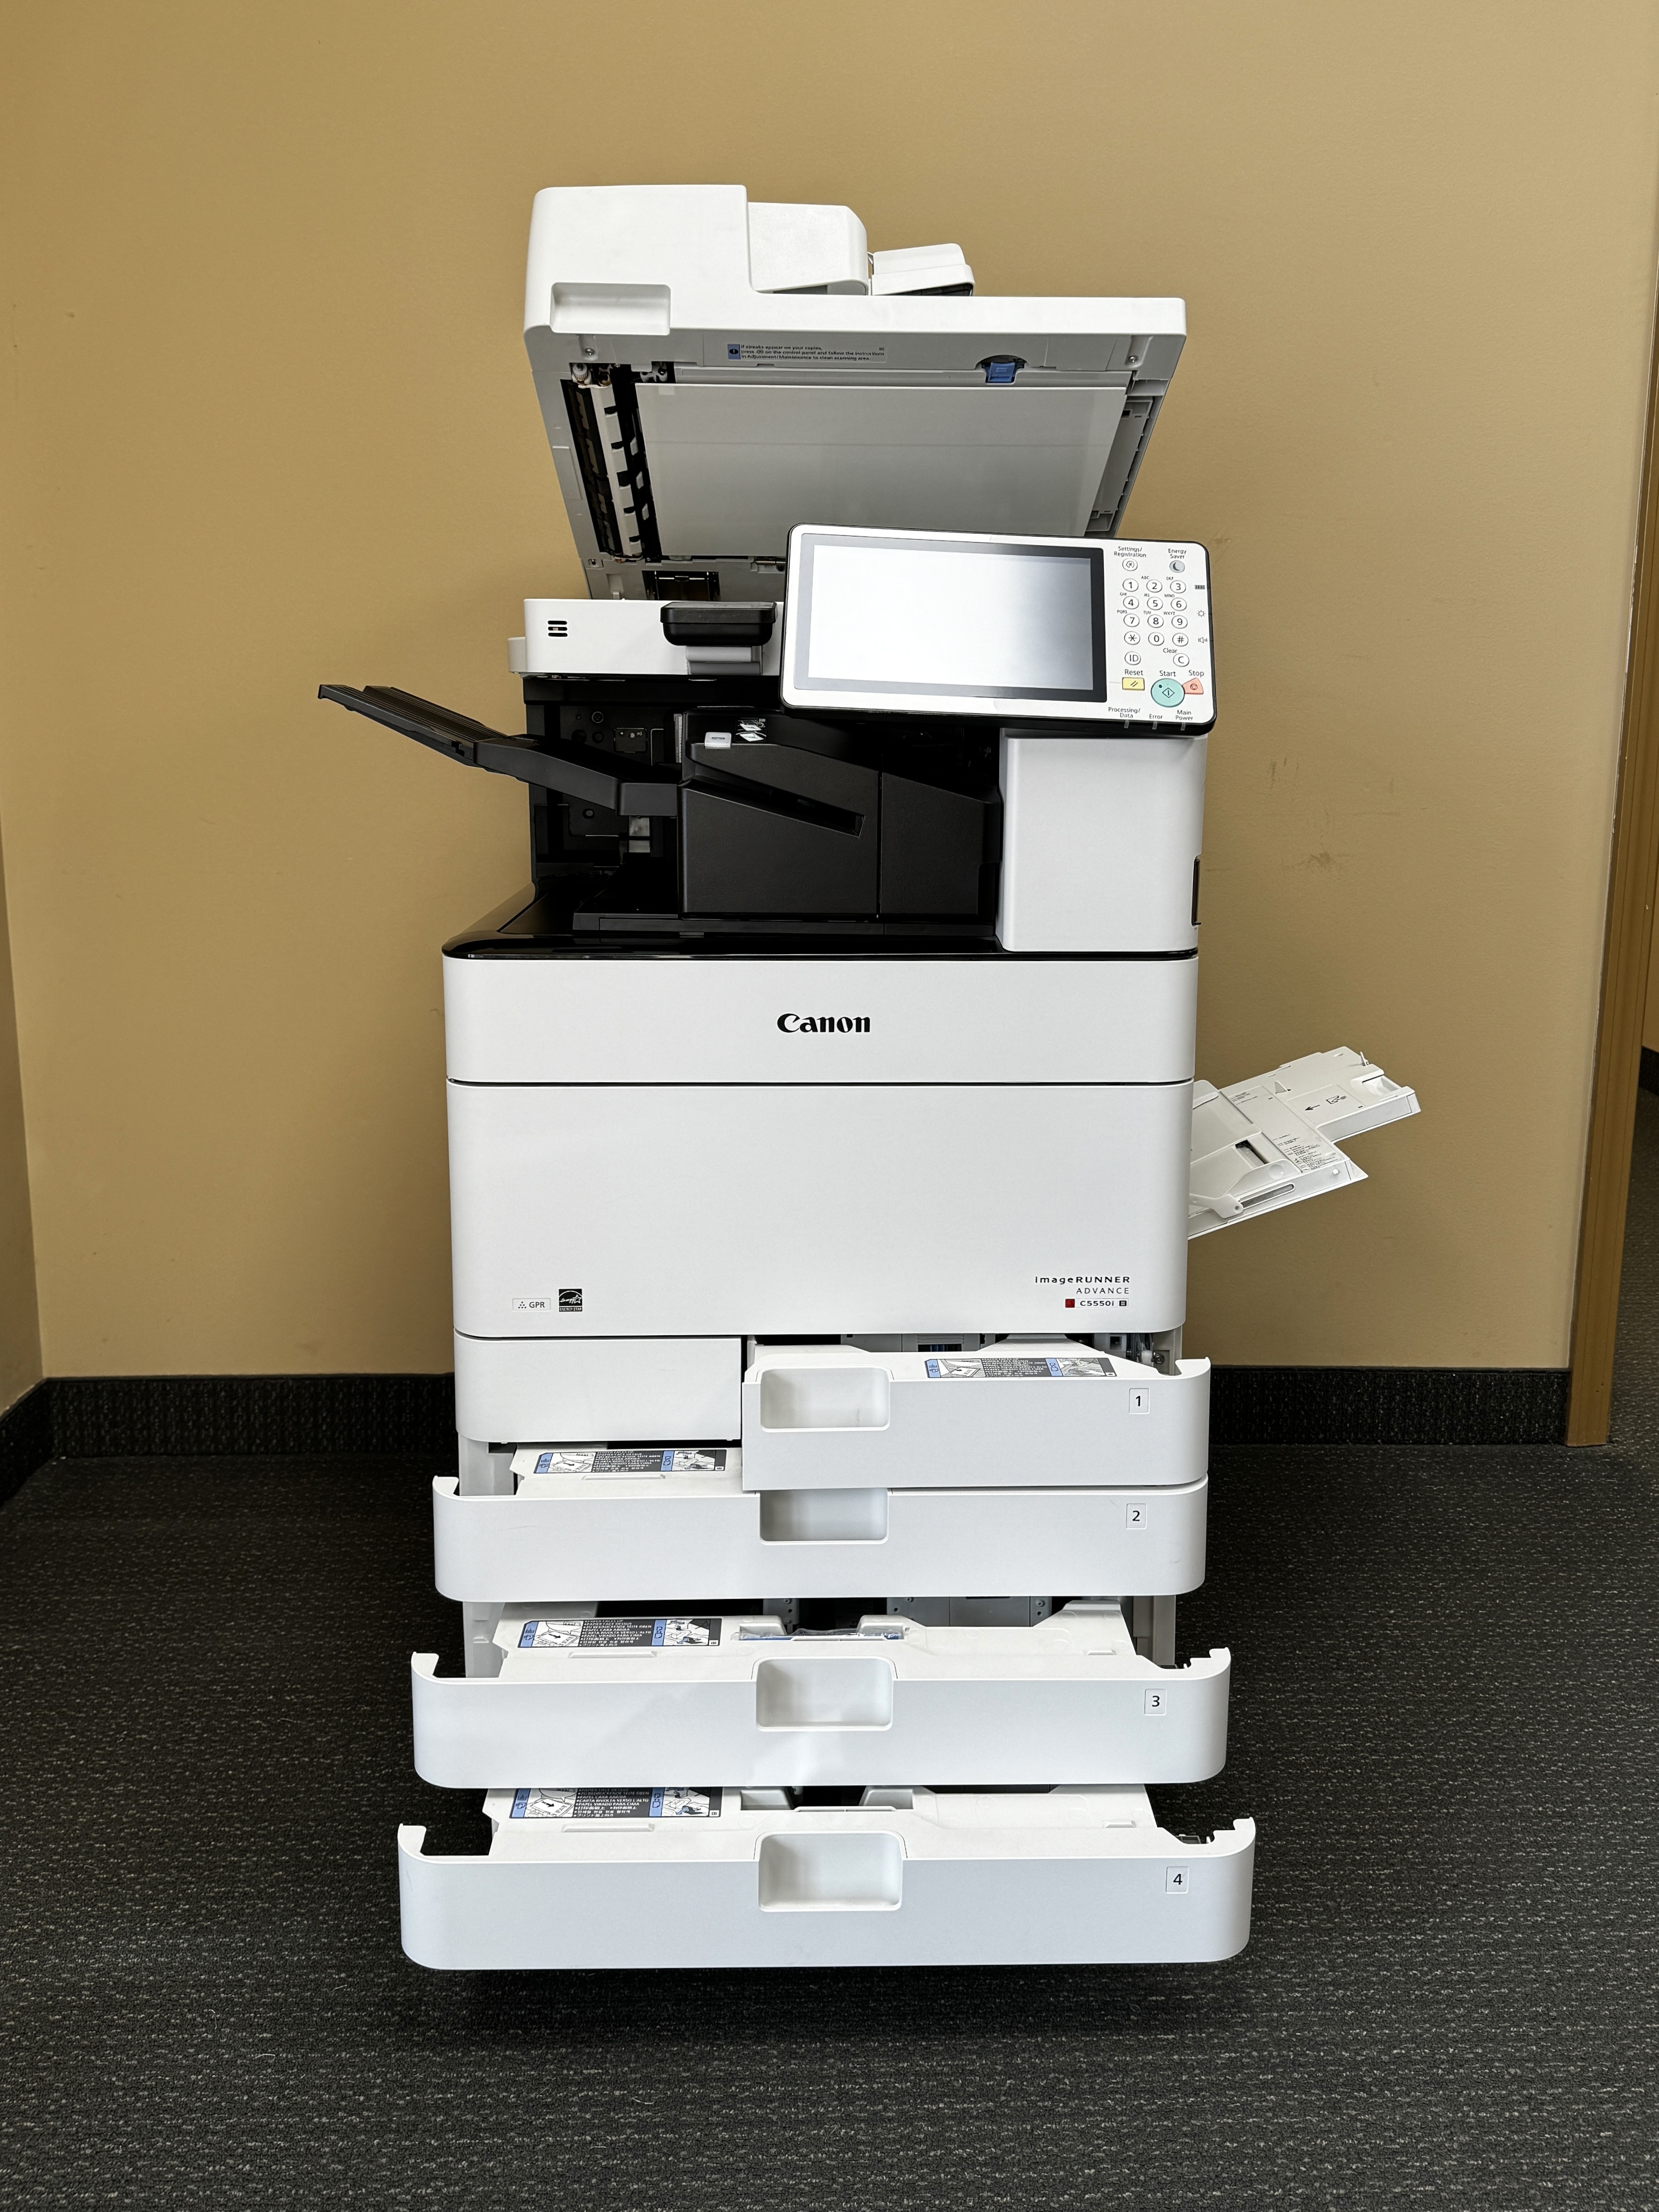 Canon Imagerunner Advance c5550ii used in large format scanning and printing. 